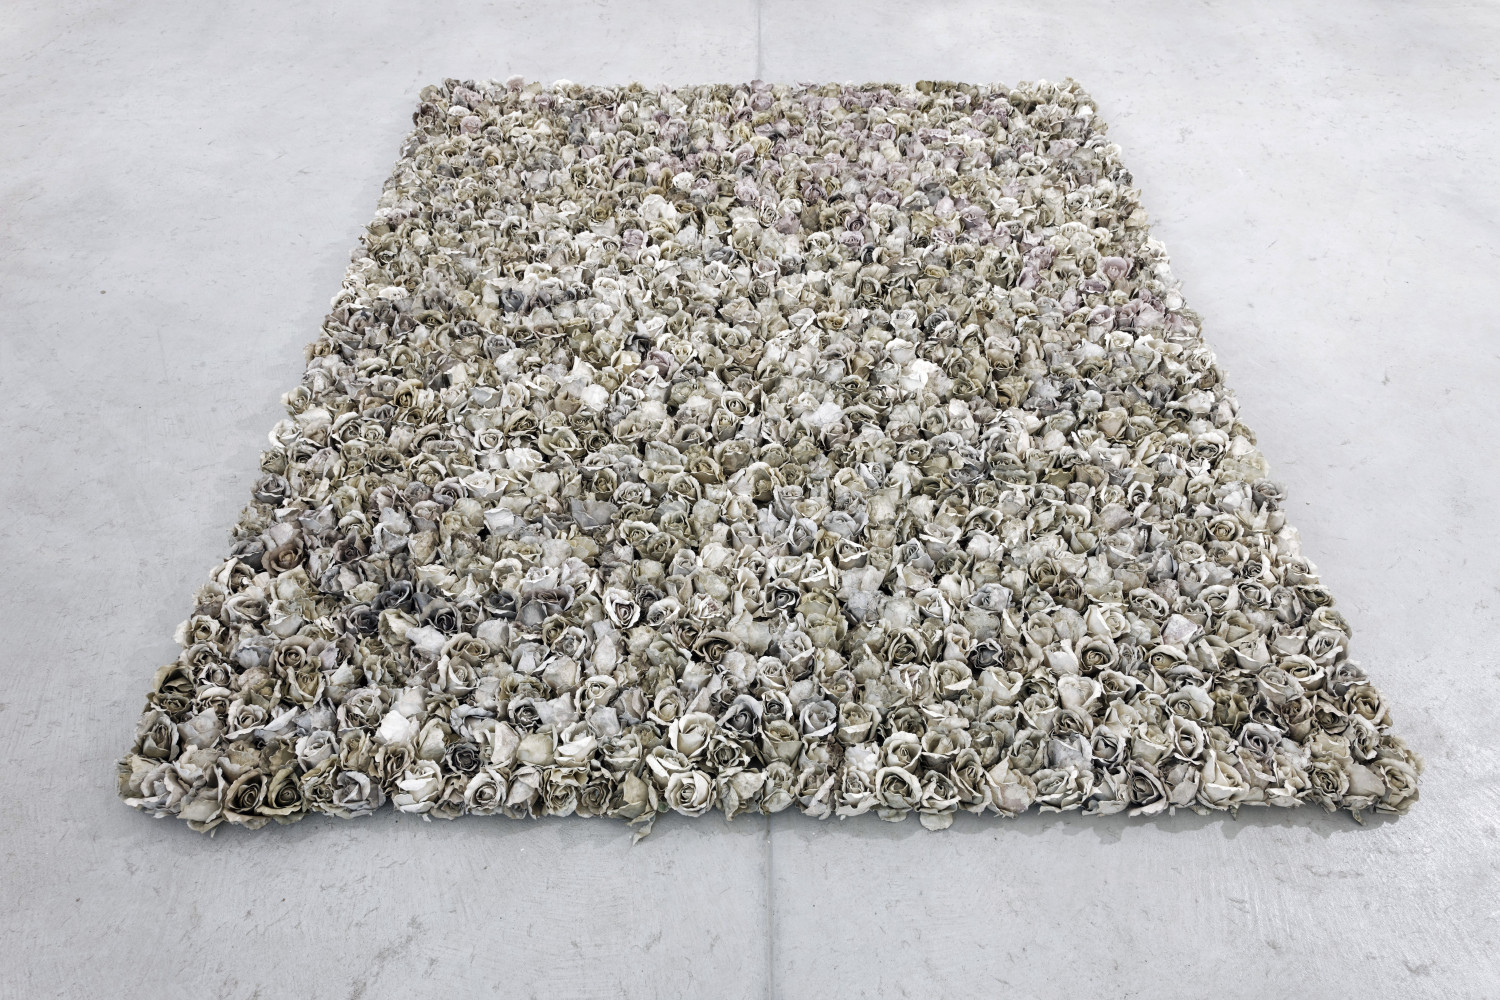 Lawrence Carroll, ‘Untitled’, 2015, around 1300 artificial flowers, pigment, stain, housepaint, dust